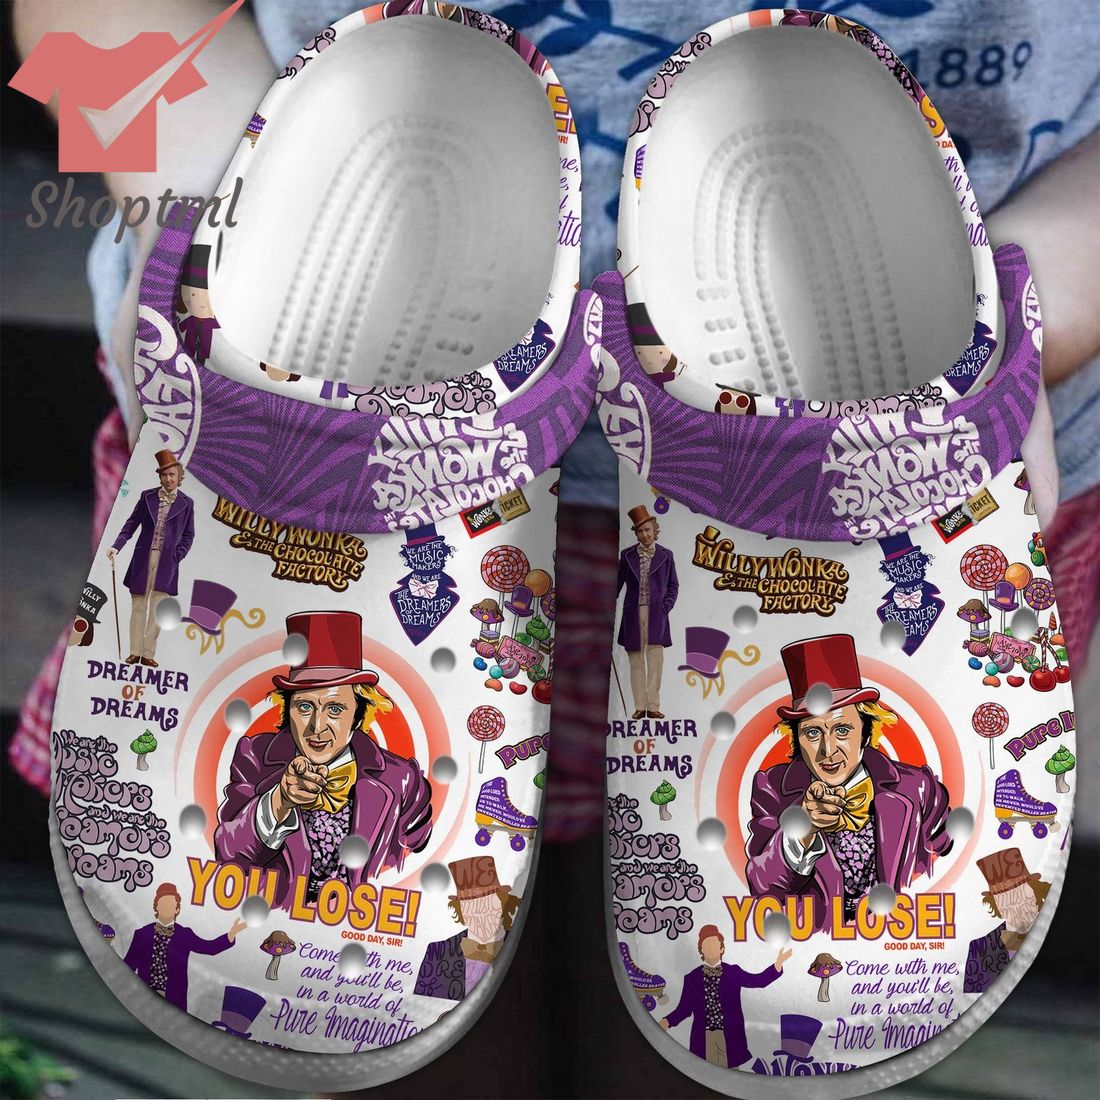 Willy Wonka & the chocolate factory crocs clog shoes